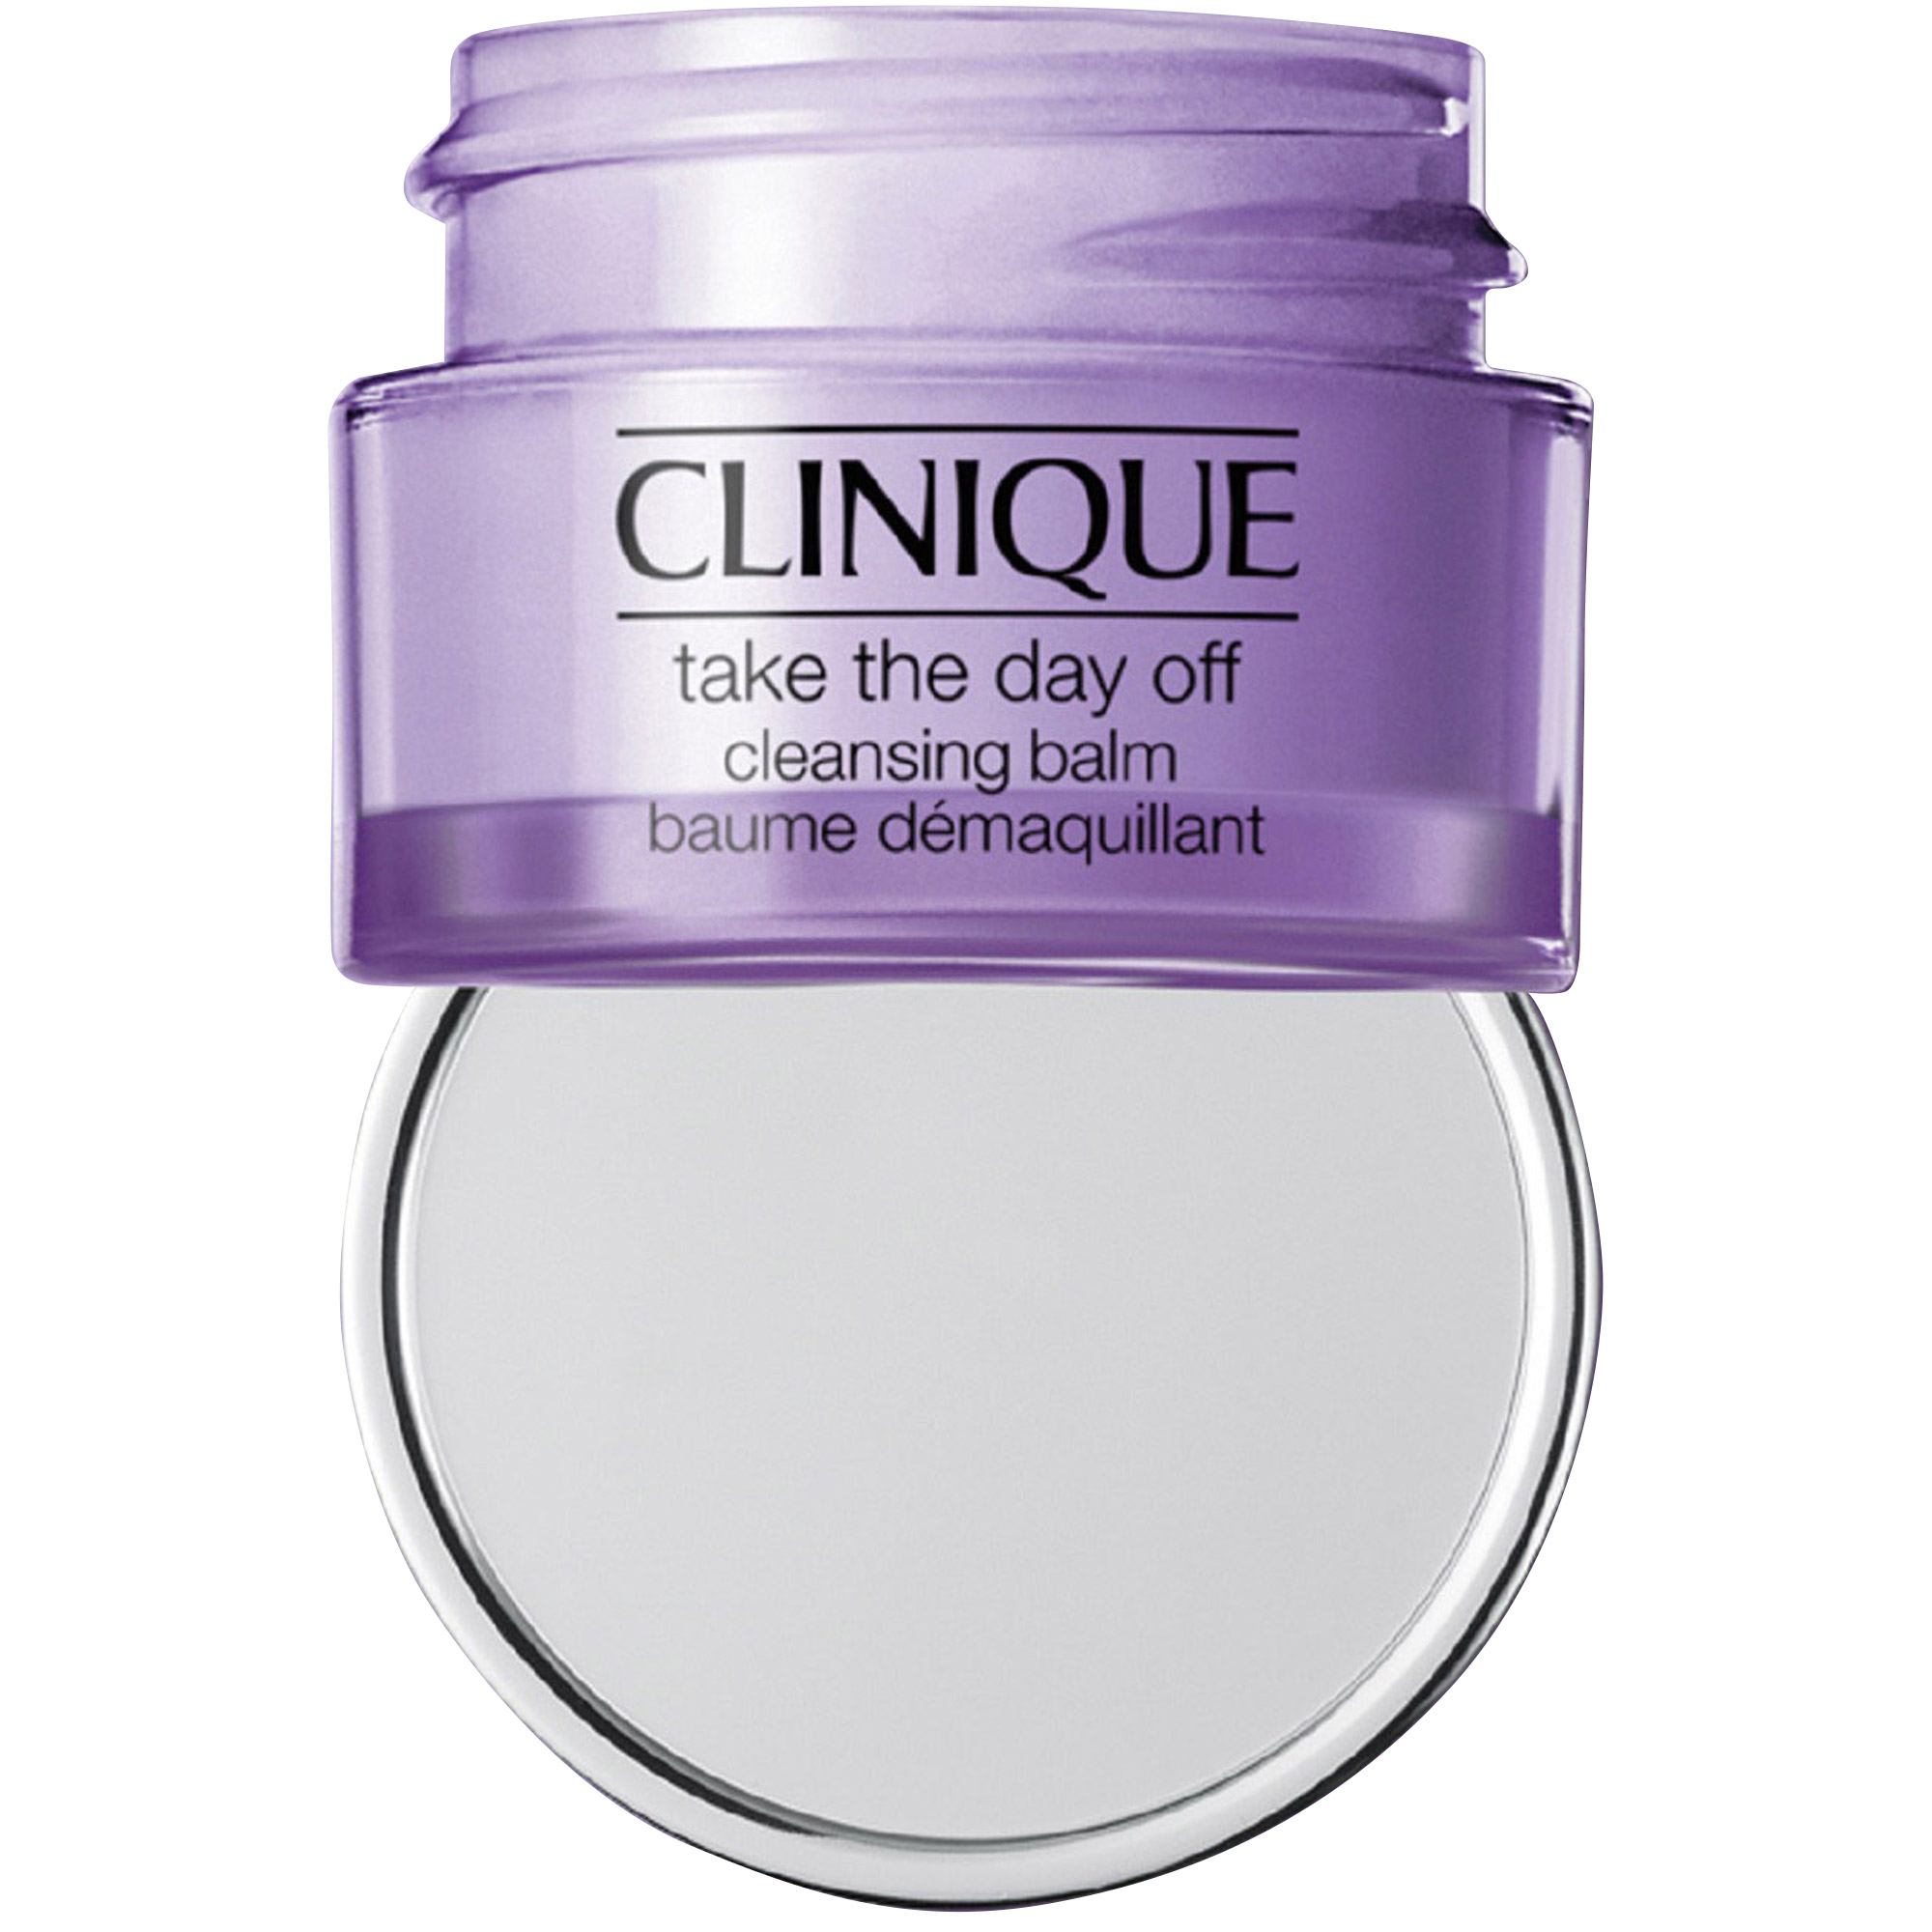 Take the day off cleansing. Clinique take the Day off Cleansing Balm Baume Demaquillant. Clinique take the Day off, 30 мл. Clinique take the Day off Cleansing Balm Baume demaquillant125 ml годен до?. Clinique take the Day off 15 мл.